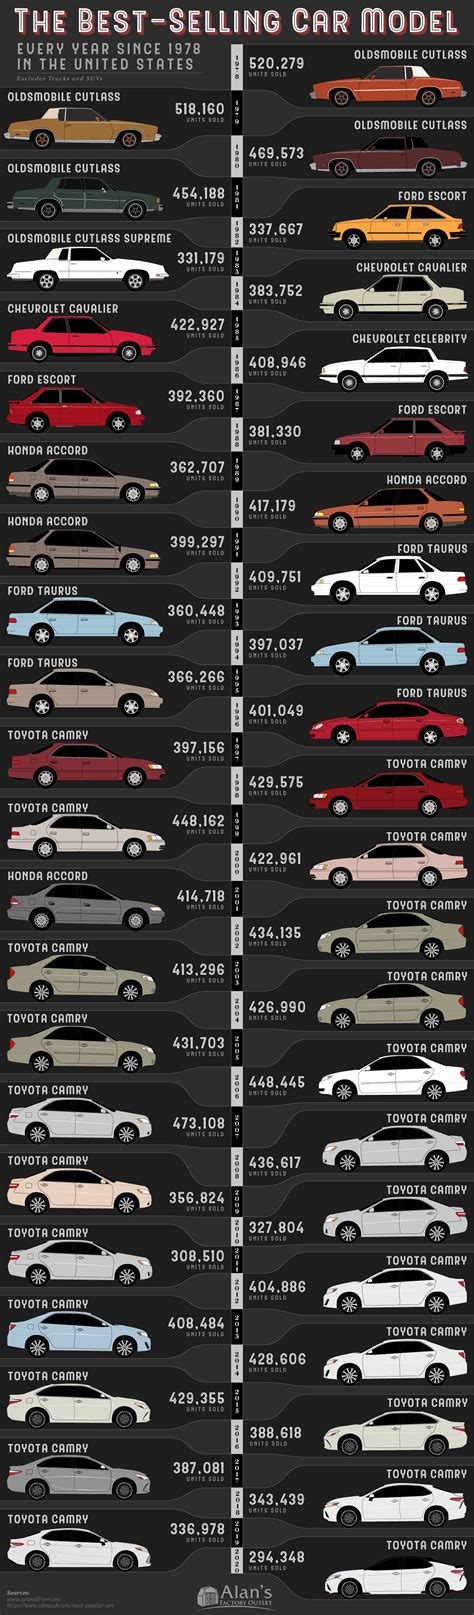 The Best Selling Car Model Every Year Since 1978 In The United States